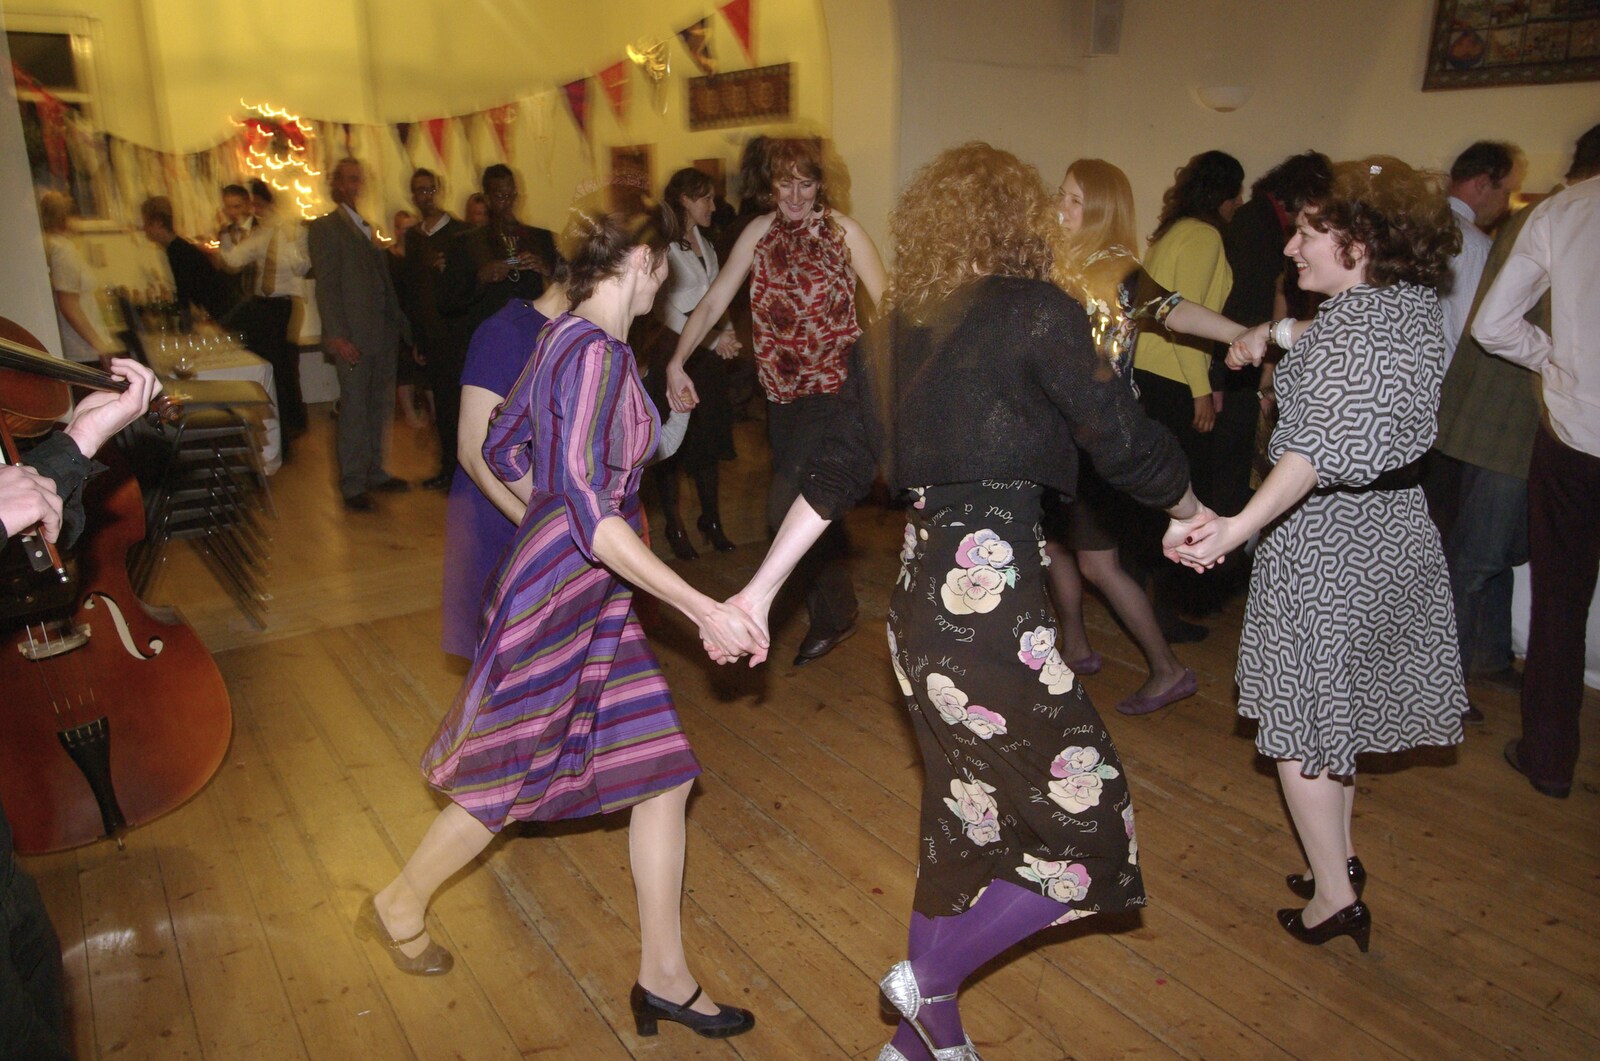 A circle of dancing from An Oxford Wedding, Iffley, Oxfordshire - 20th December 2008